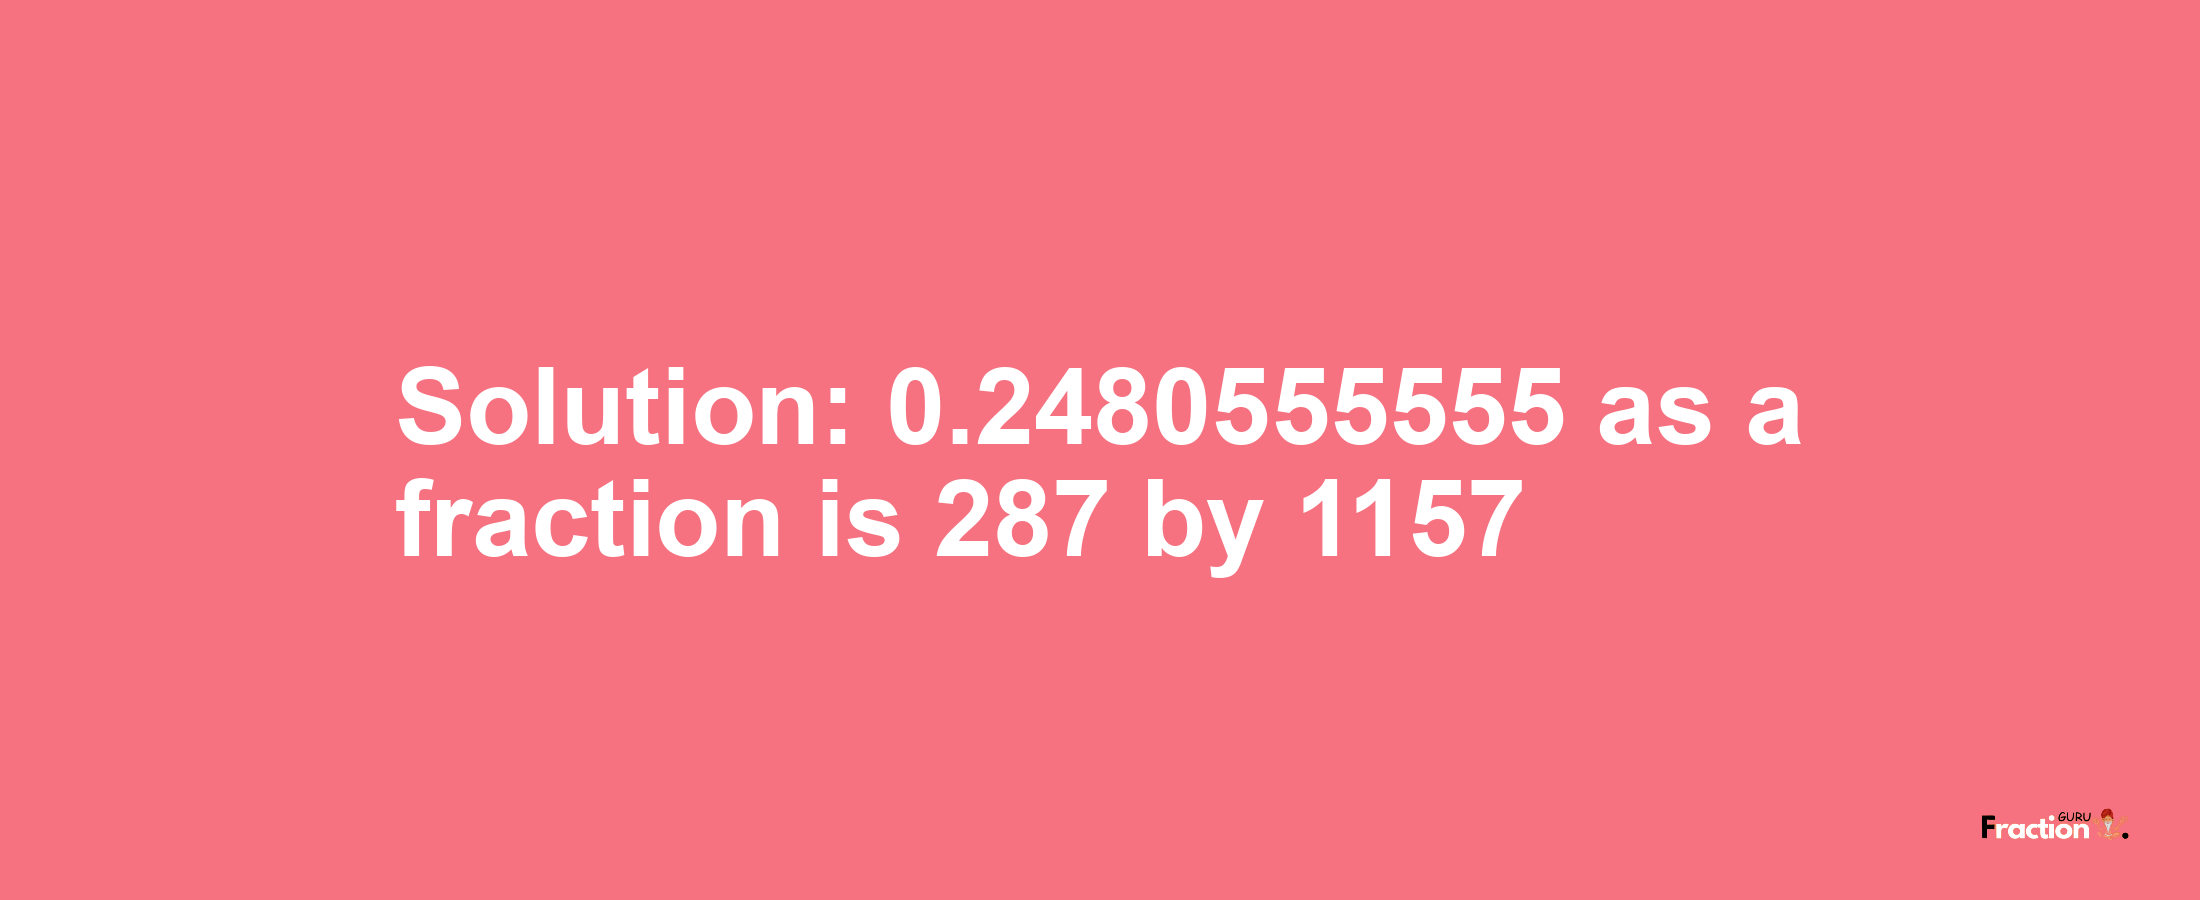 Solution:0.2480555555 as a fraction is 287/1157